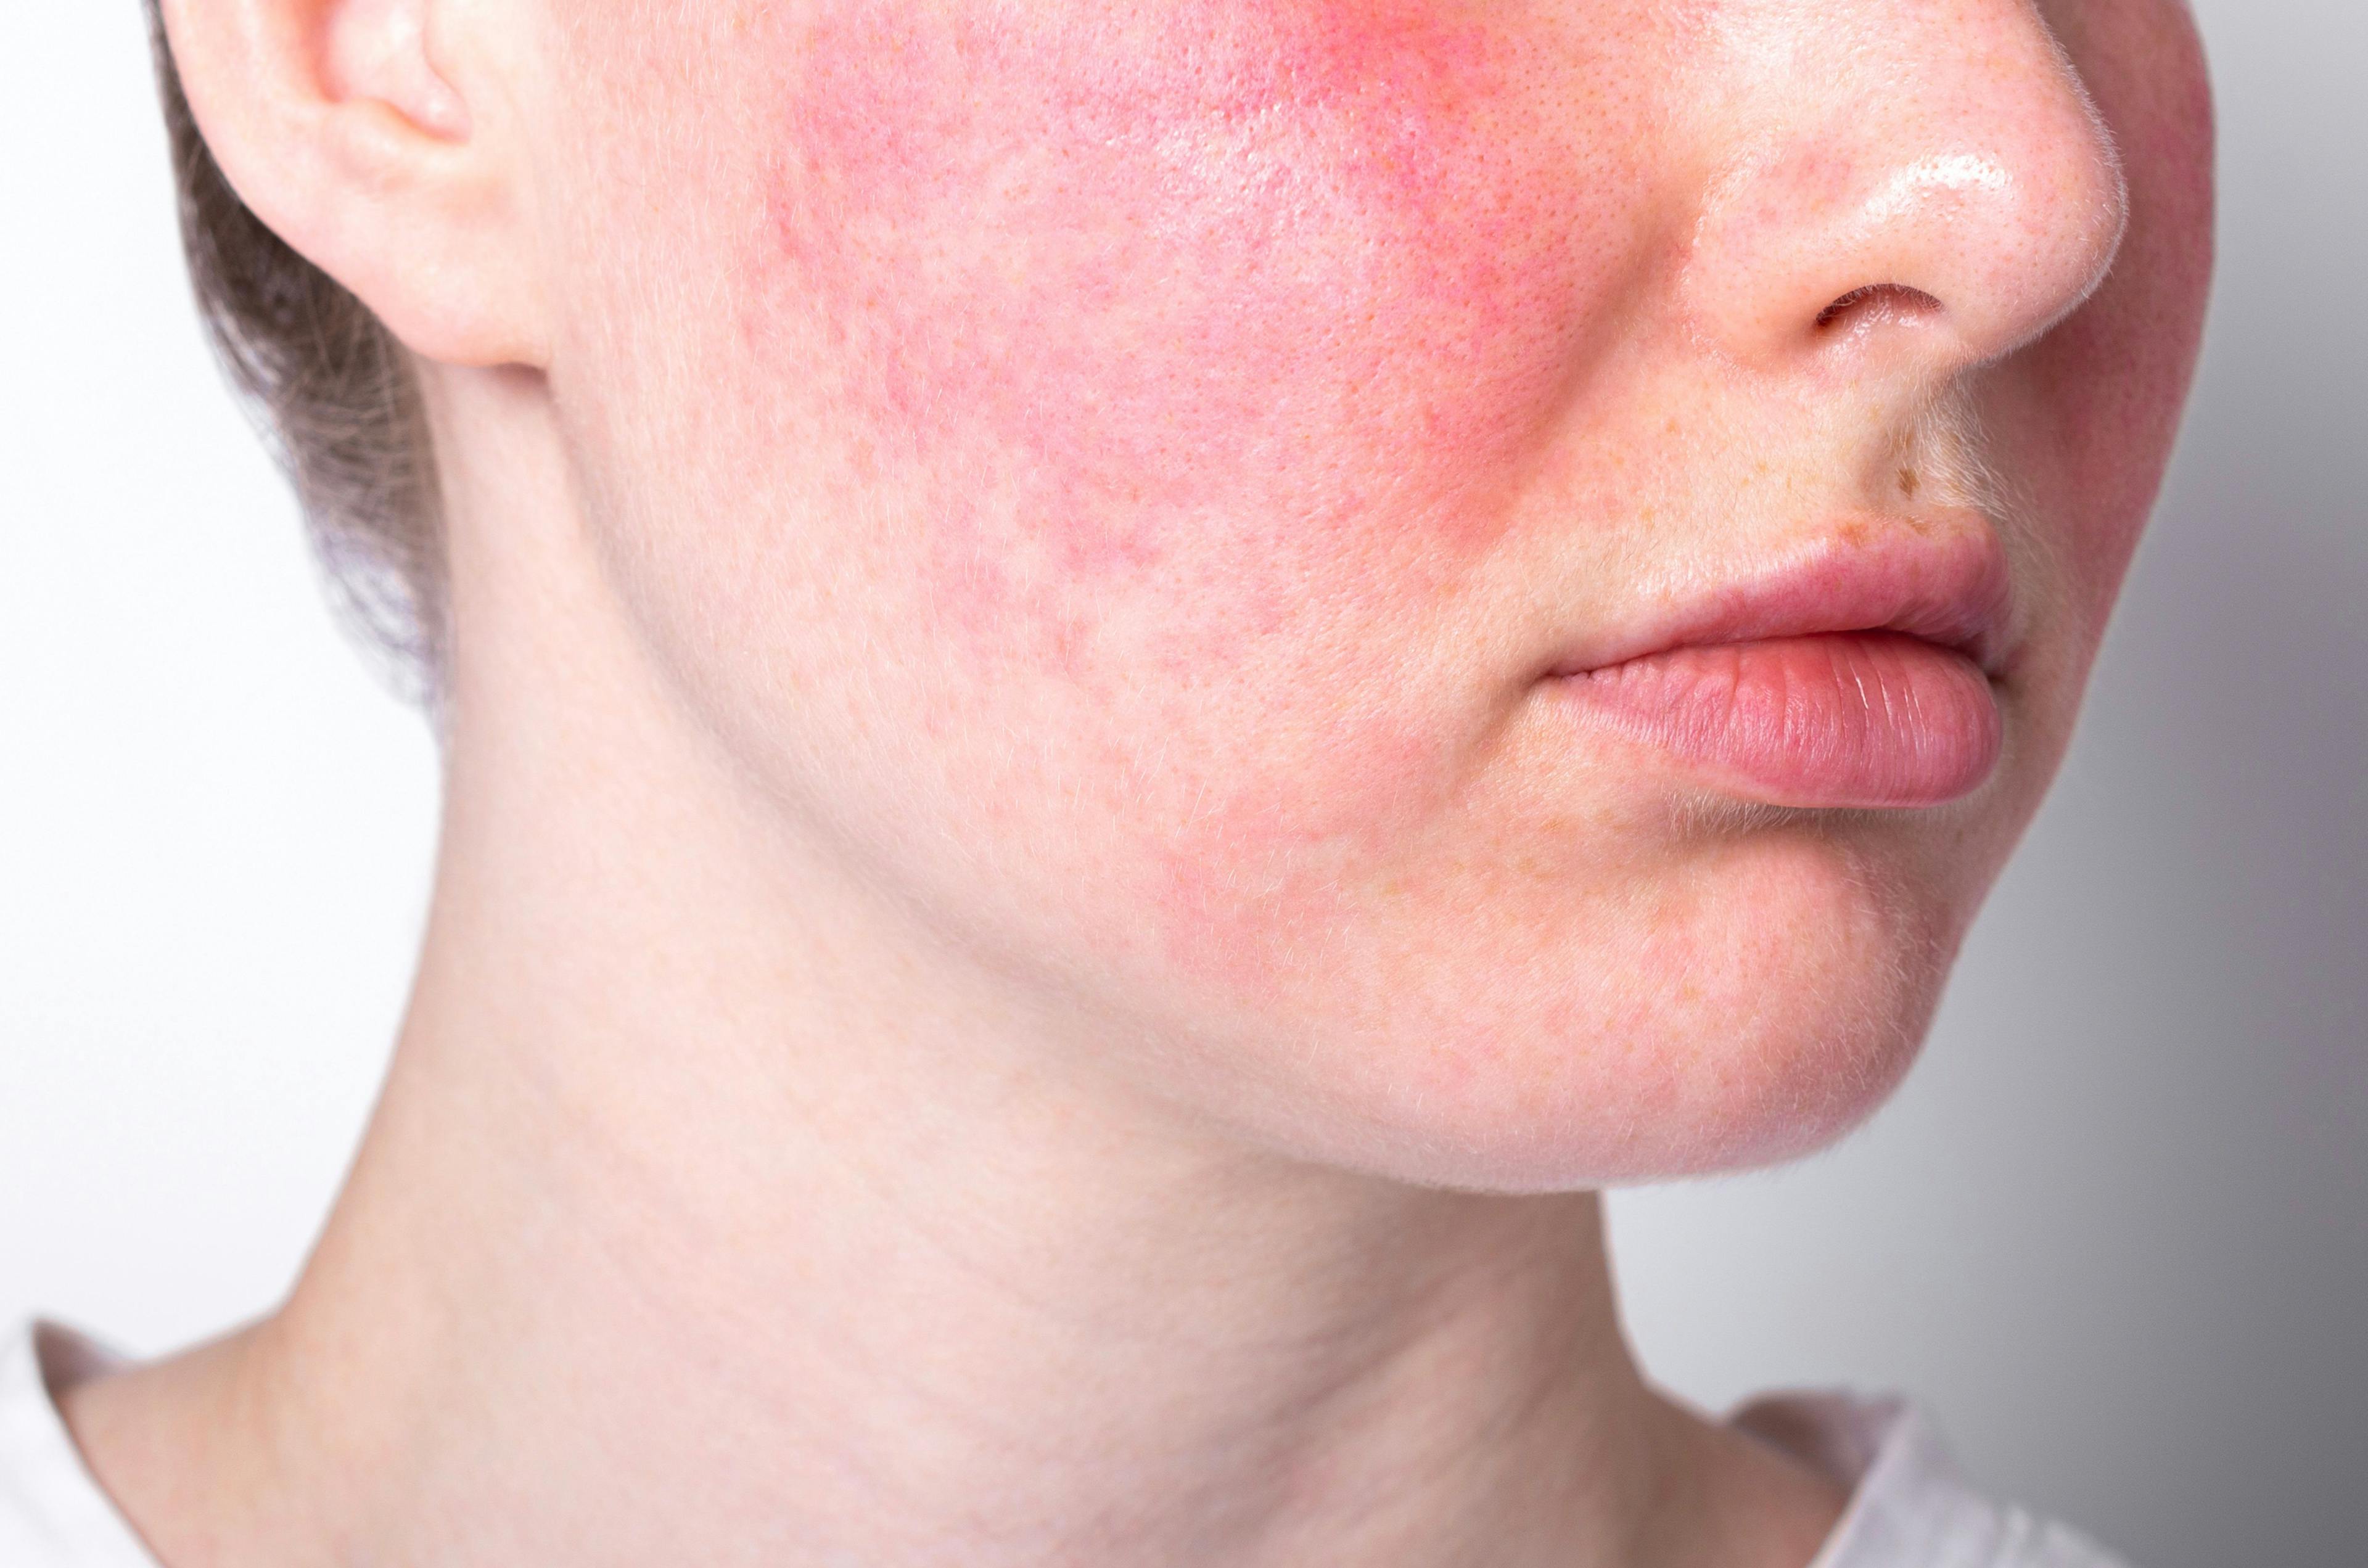 Woman with rosacea on the face